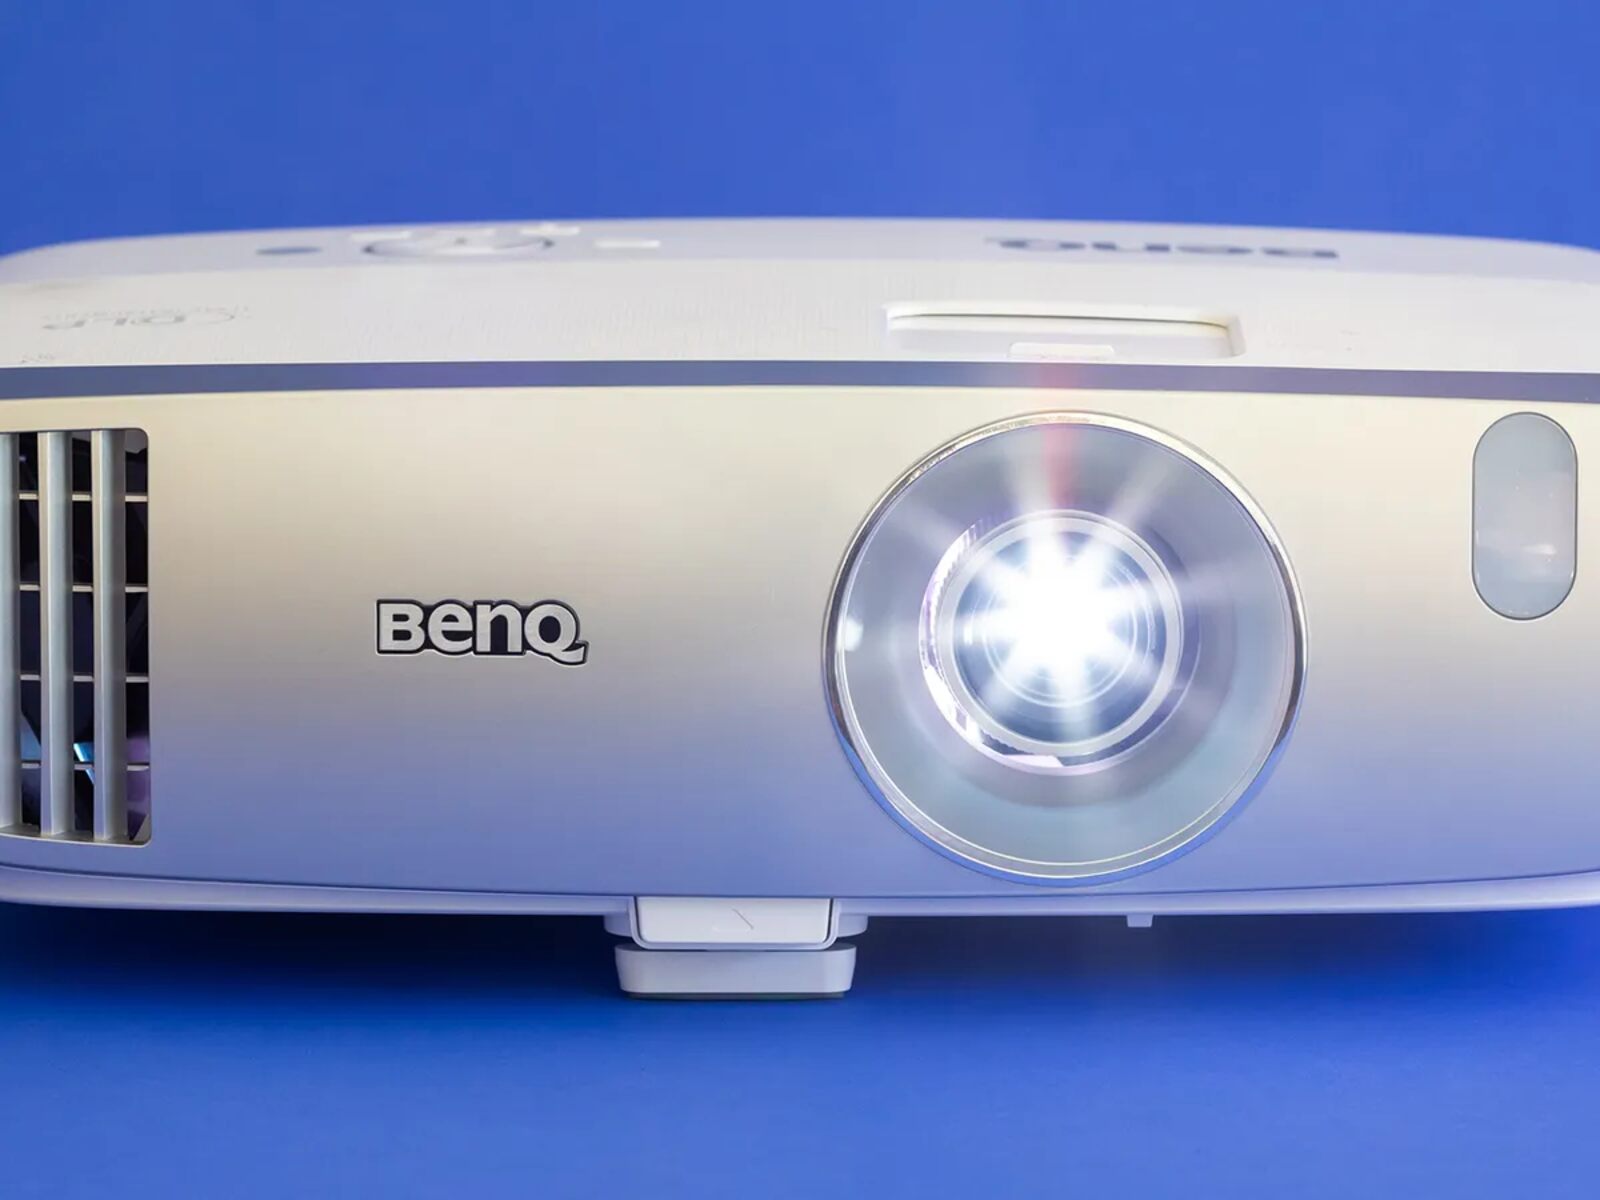 How To Connect A DVD Player To A Projector